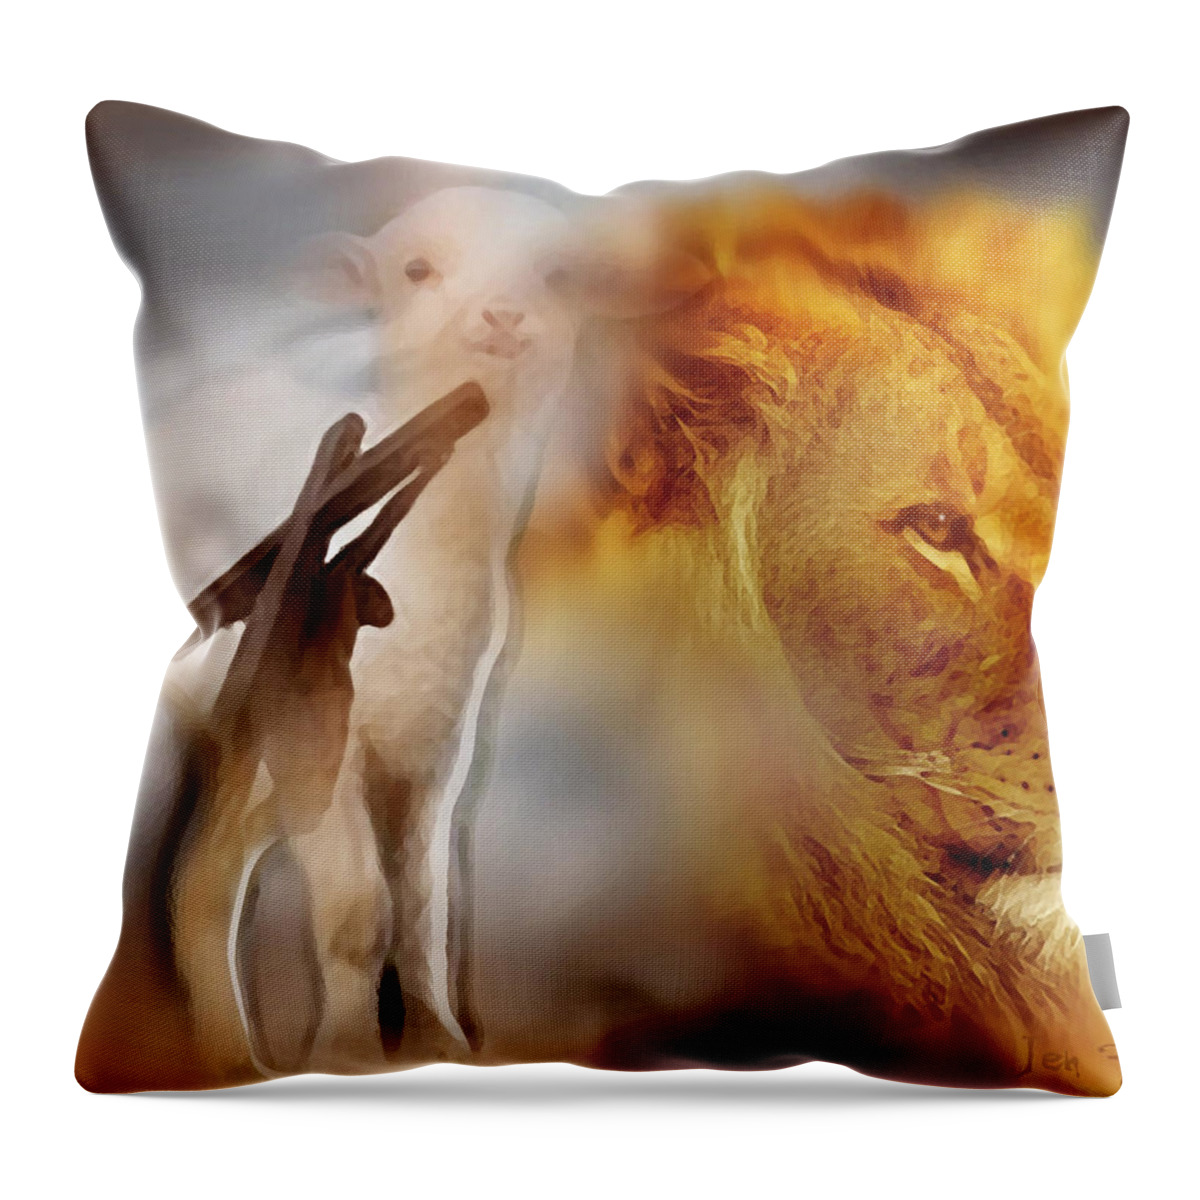 The Lion And The Lamb Throw Pillow featuring the digital art The Lion and the Lamb by Jennifer Page